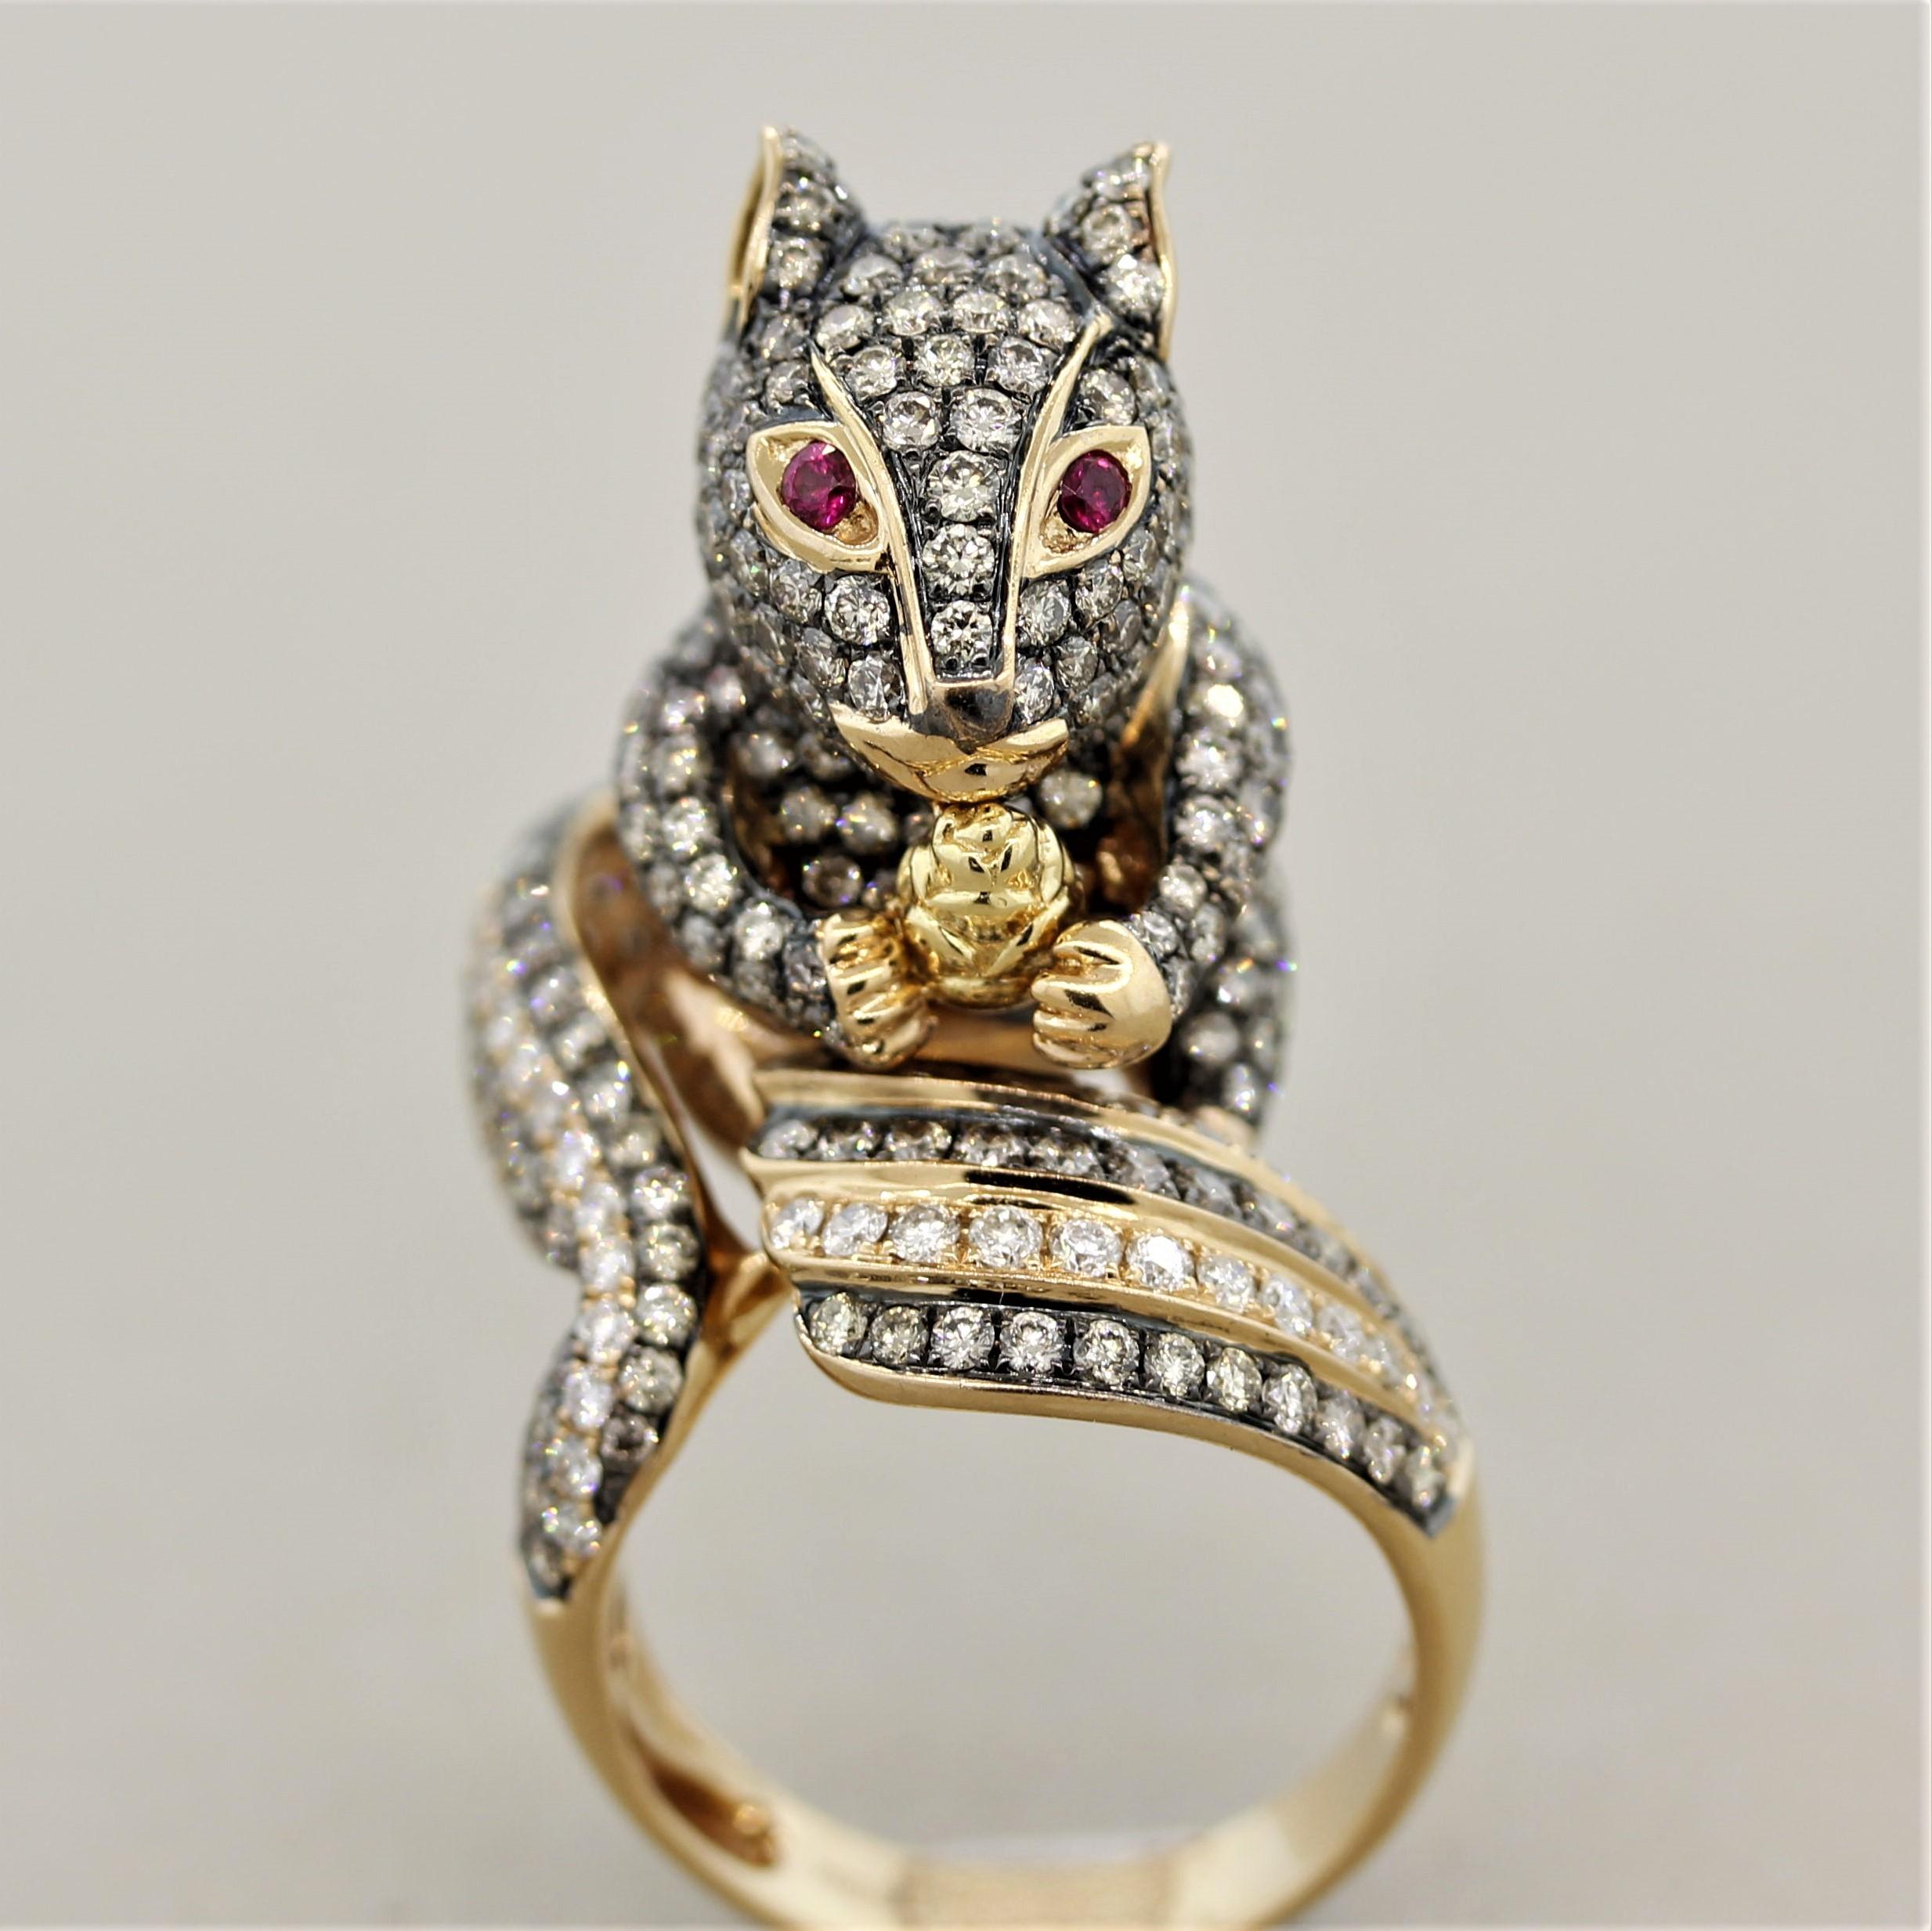 A sweet squirrel! This cute critter is studded in diamonds, 5.46 carats of round brilliant cut diamonds which are set across its body and tail. Two round shaped rubies are used as its eyes. The ring is made in 18k rose gold with rhodium accents